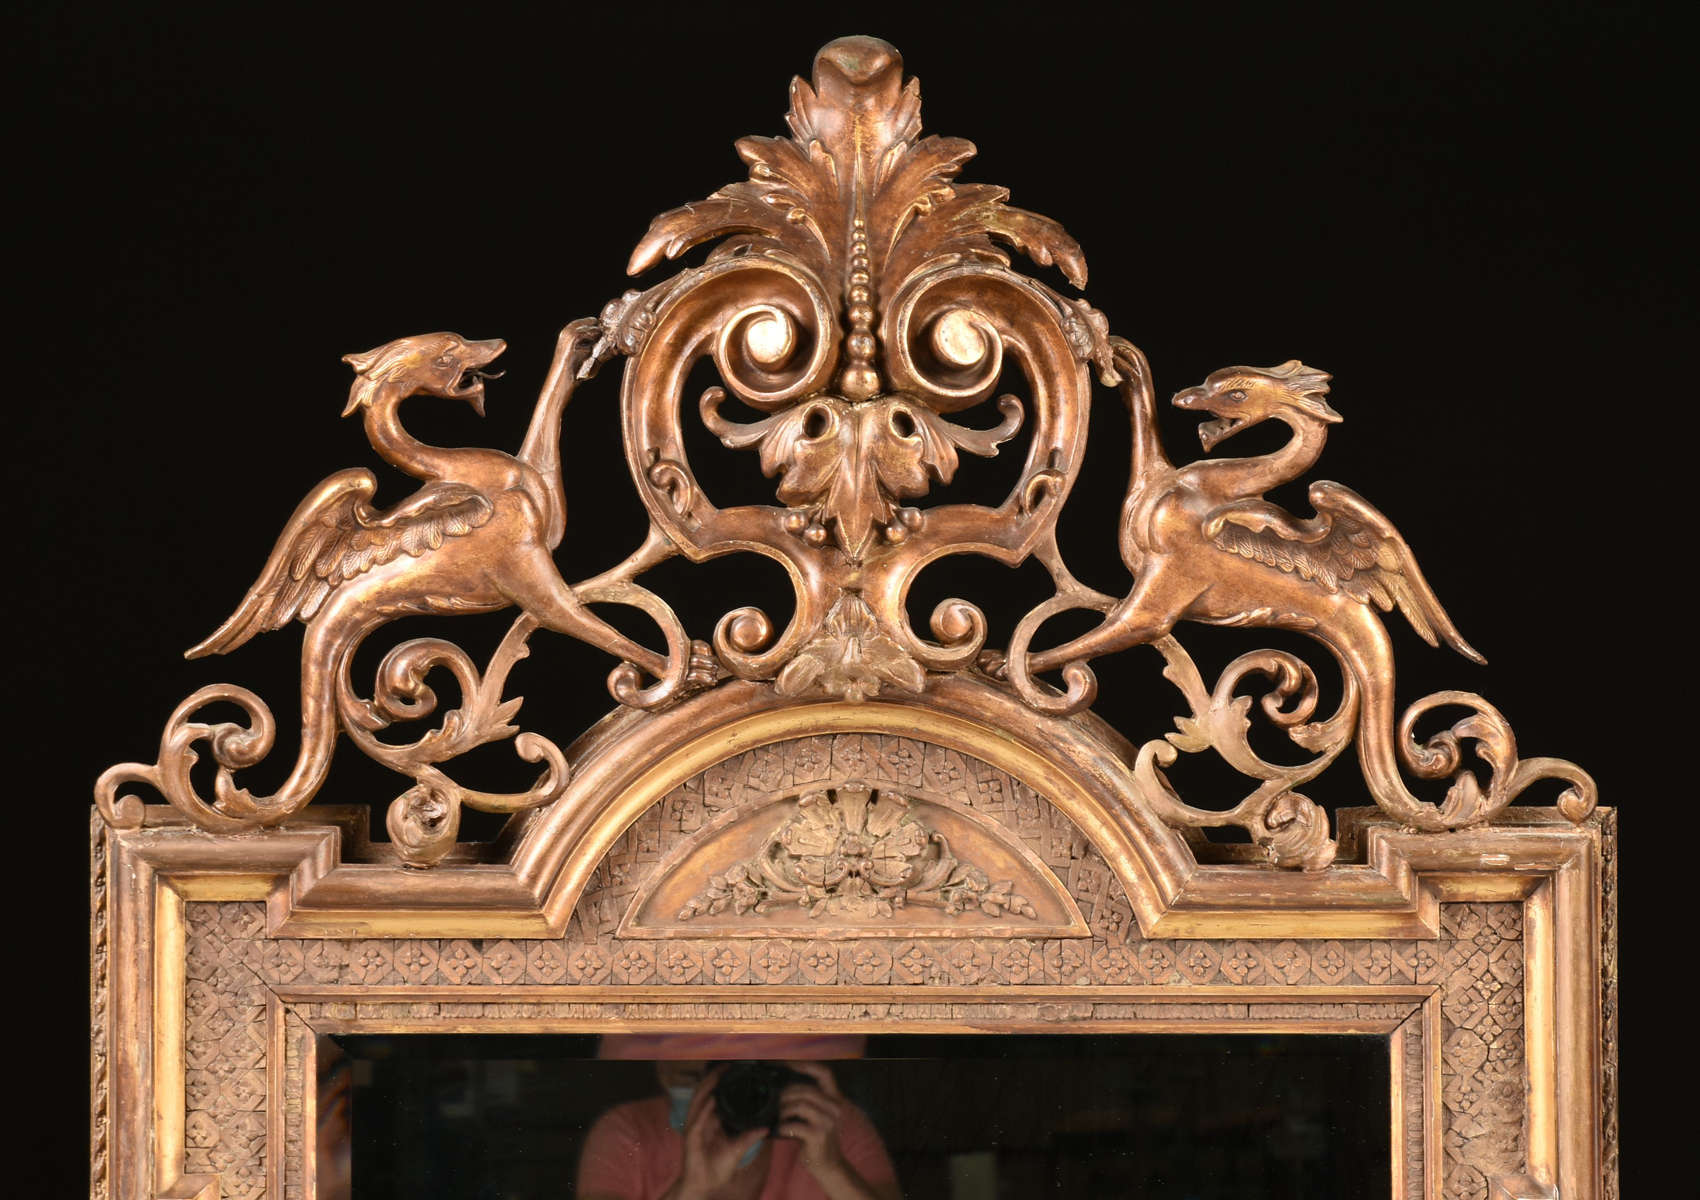 A RENAISSANCE REVIVAL GILT AND CARVED WOOD PIER MIRROR, FRENCH, THIRD QUARTER 19TH CENTURY, with a - Image 2 of 5